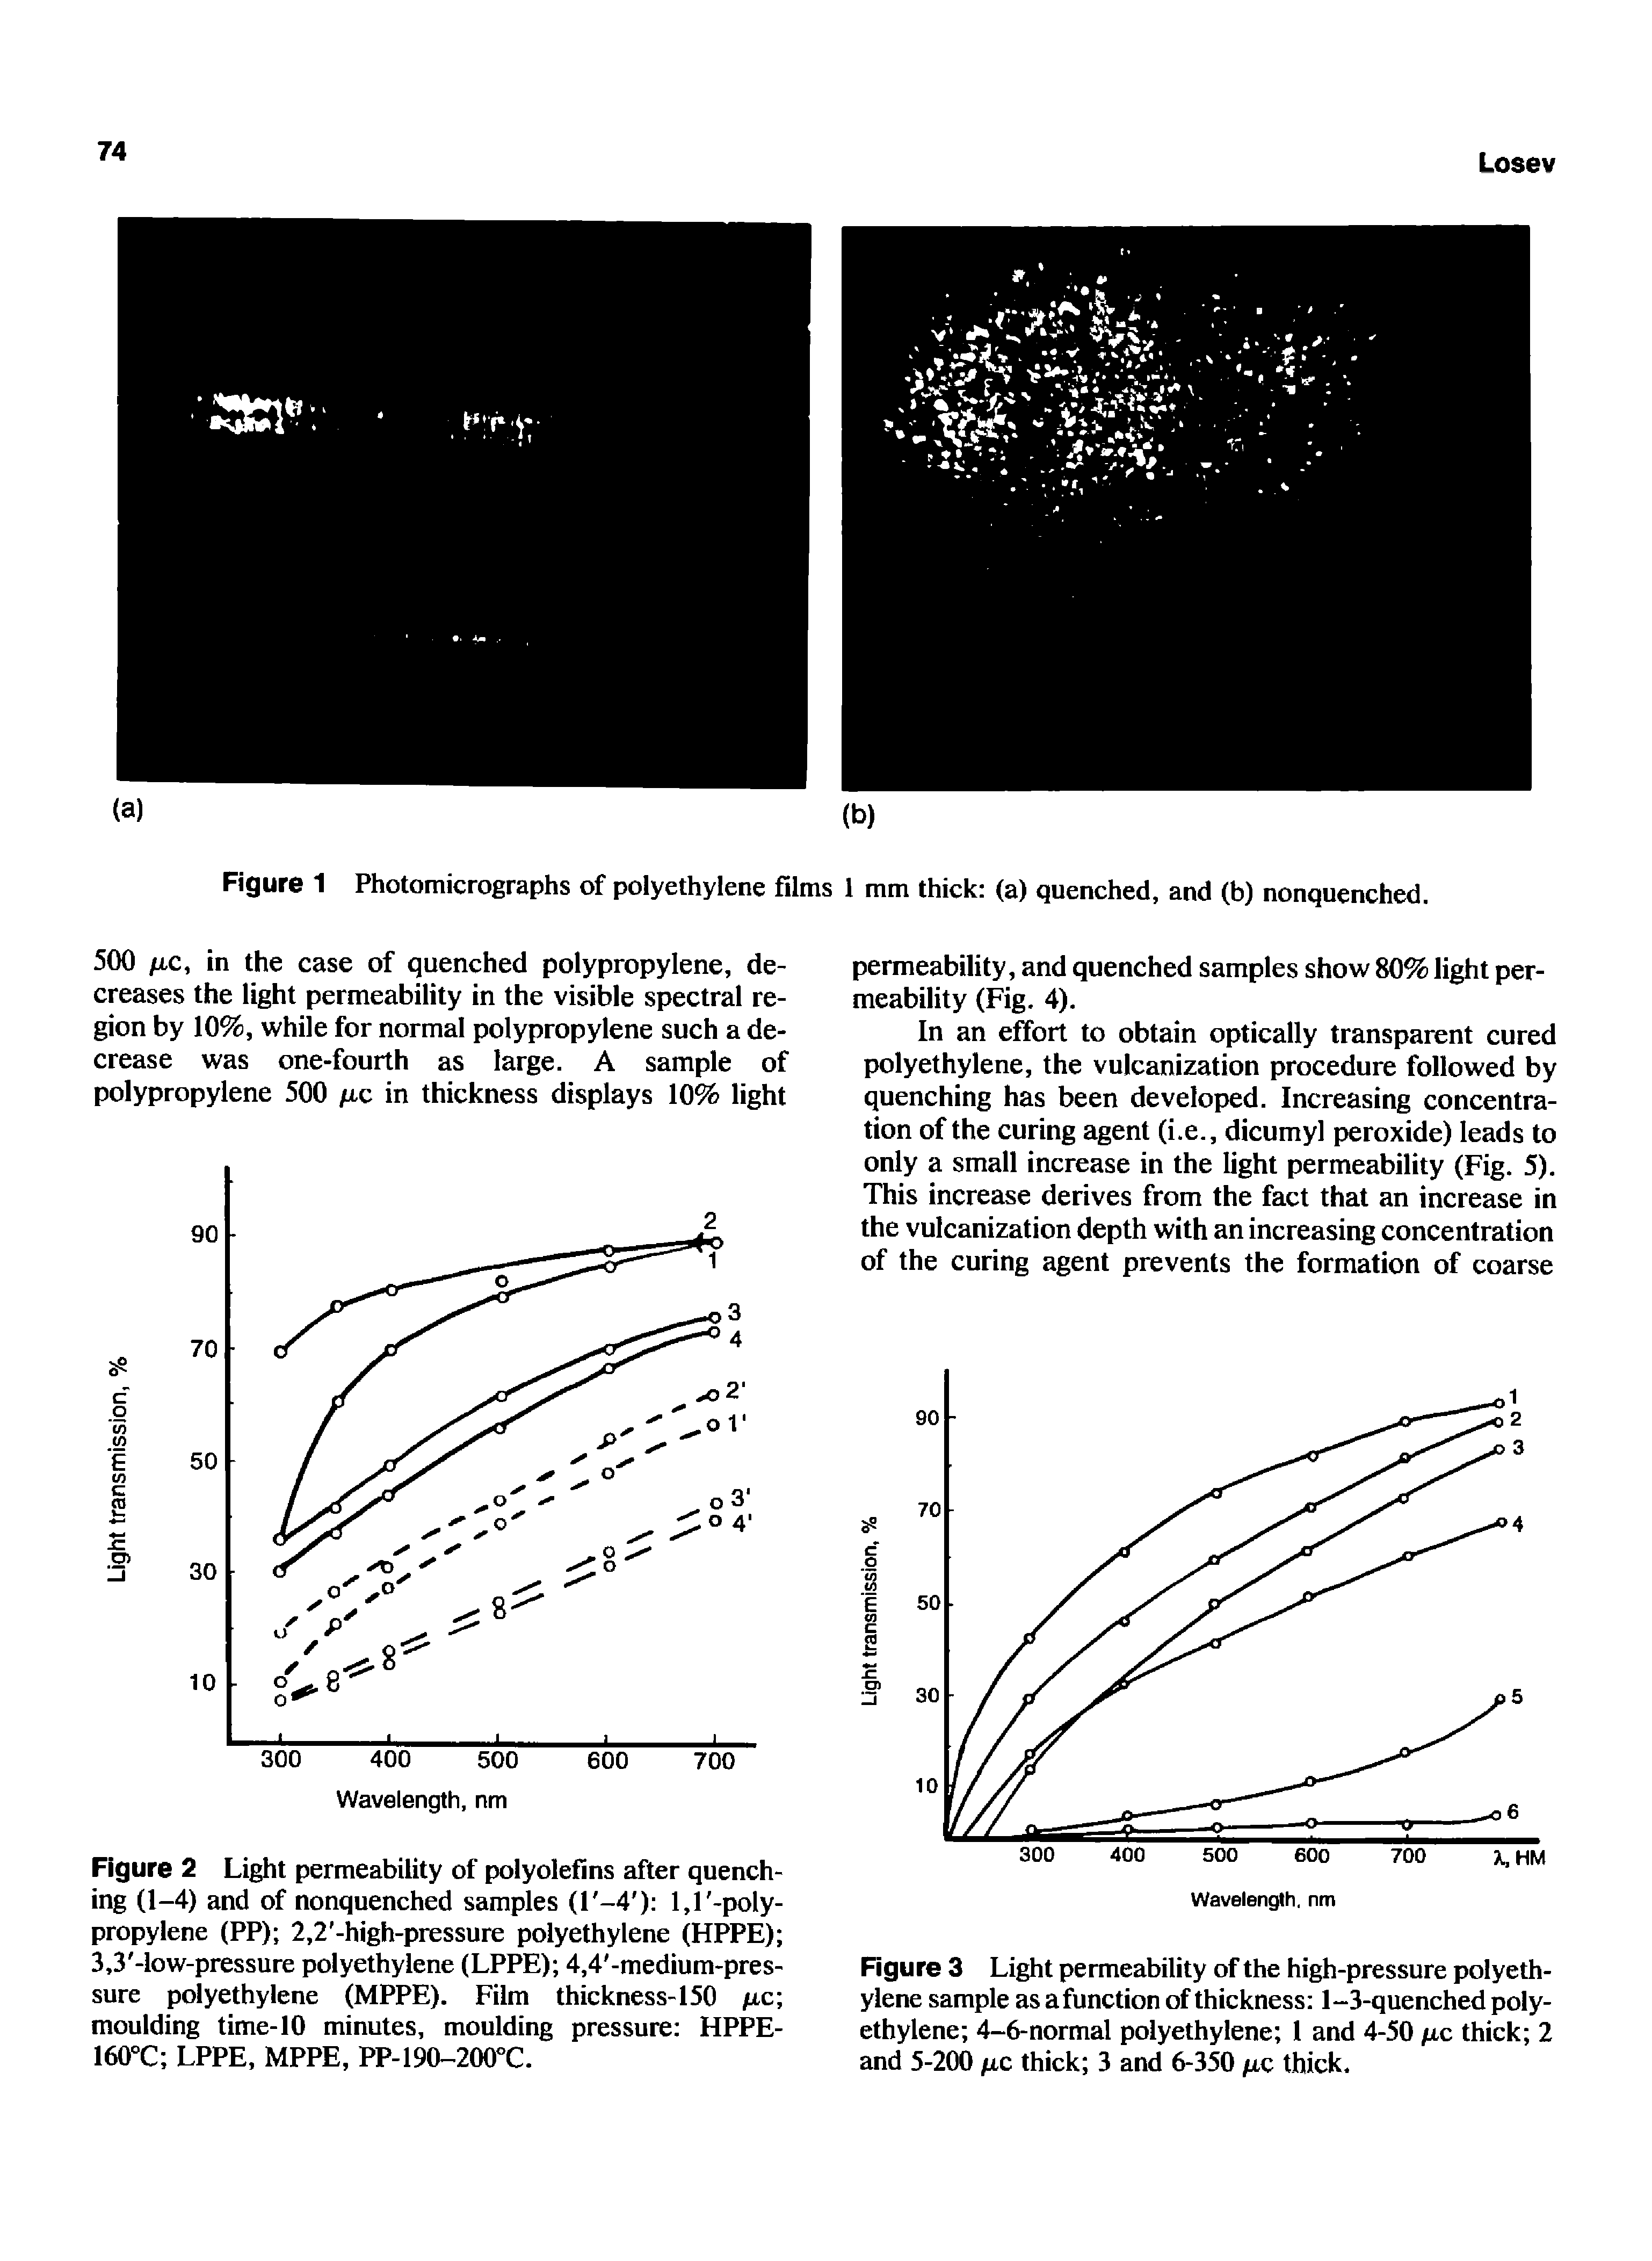 Figure 2 Light permeability of polyolefins after quenching (1-4) and of nonquenched samples (l -4 ) l,l -poly-propylene (PP) 2,2 -high-pressure polyethylene (HPPE) 3,3 -low-pressure polyethylene (LPPE) 4,4 -medium-pres-sure polyethylene (MPPE). Film thickness-150 fic moulding time-10 minutes, moulding pressure HPPE-160°C LPPE, MPPE, PP-190-200X.